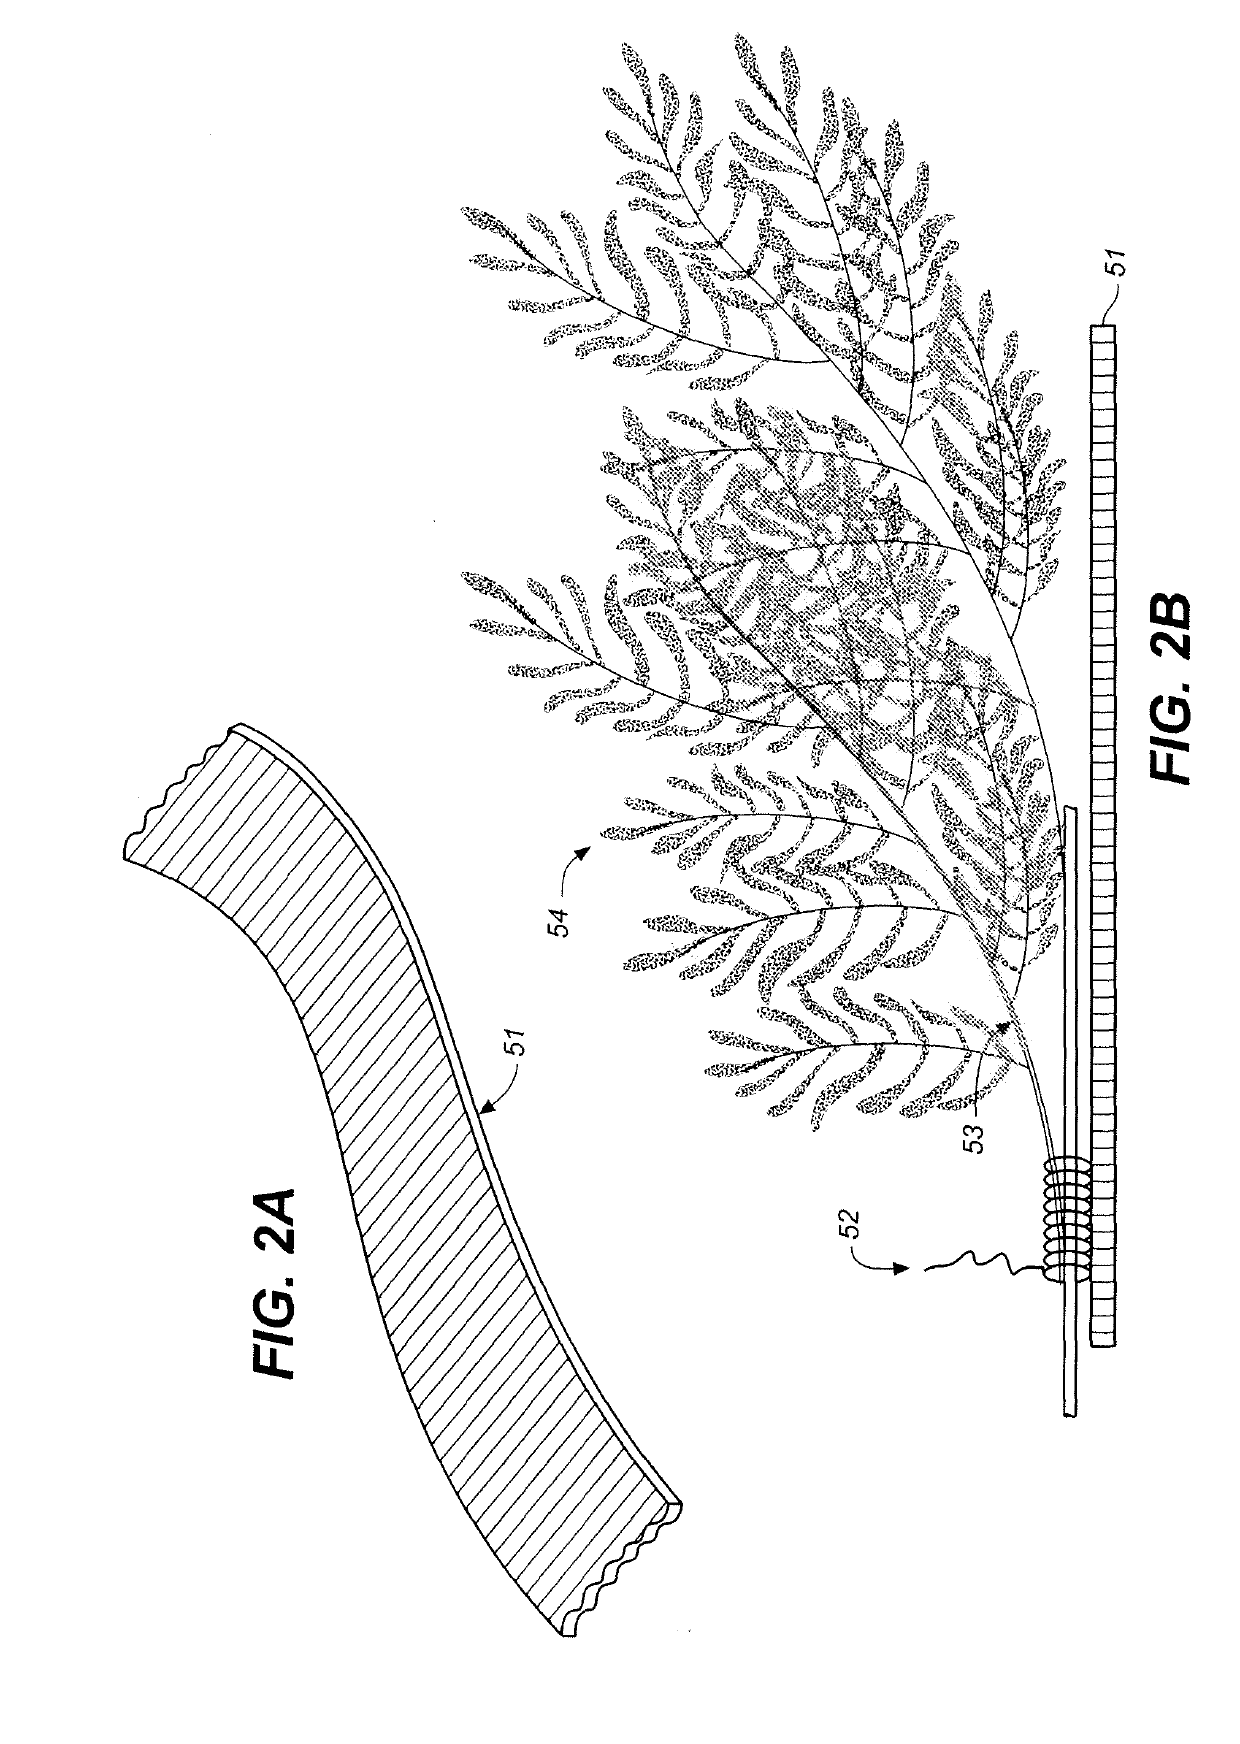 Crawling insect barrier device and corresponding method